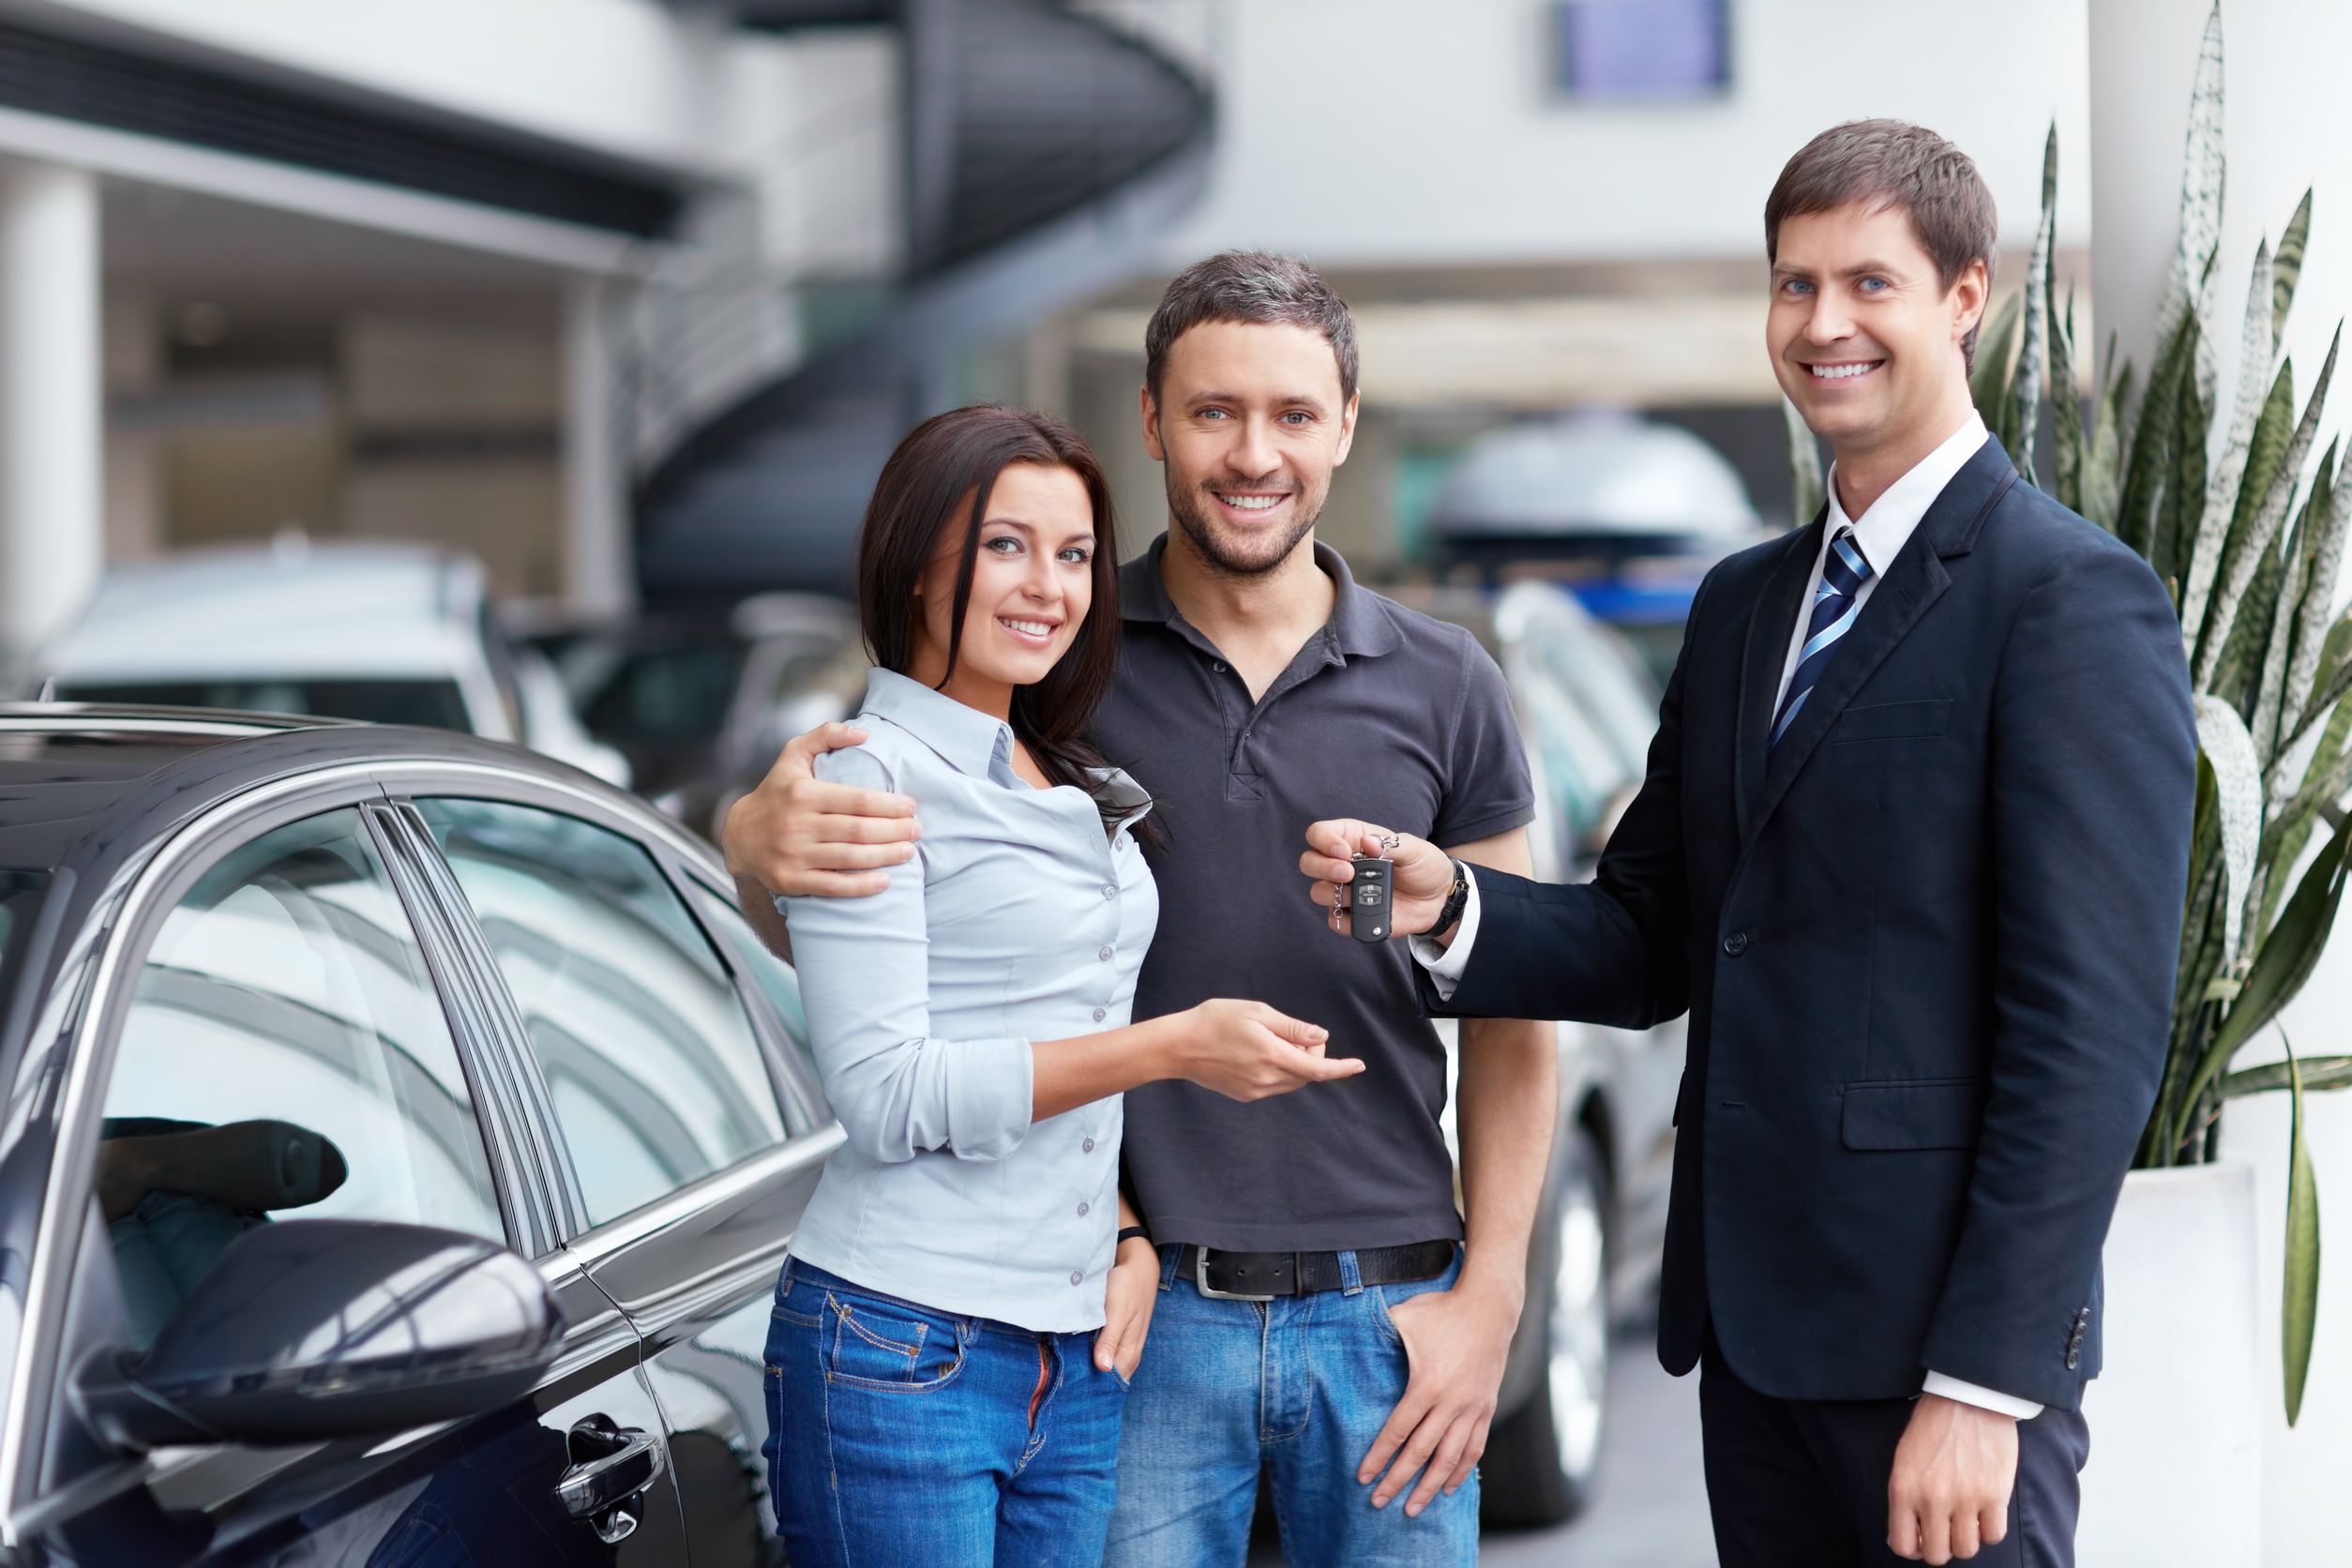 Top Reasons Why Local Residents Adore One Honest Used Car Dealer in Cicero